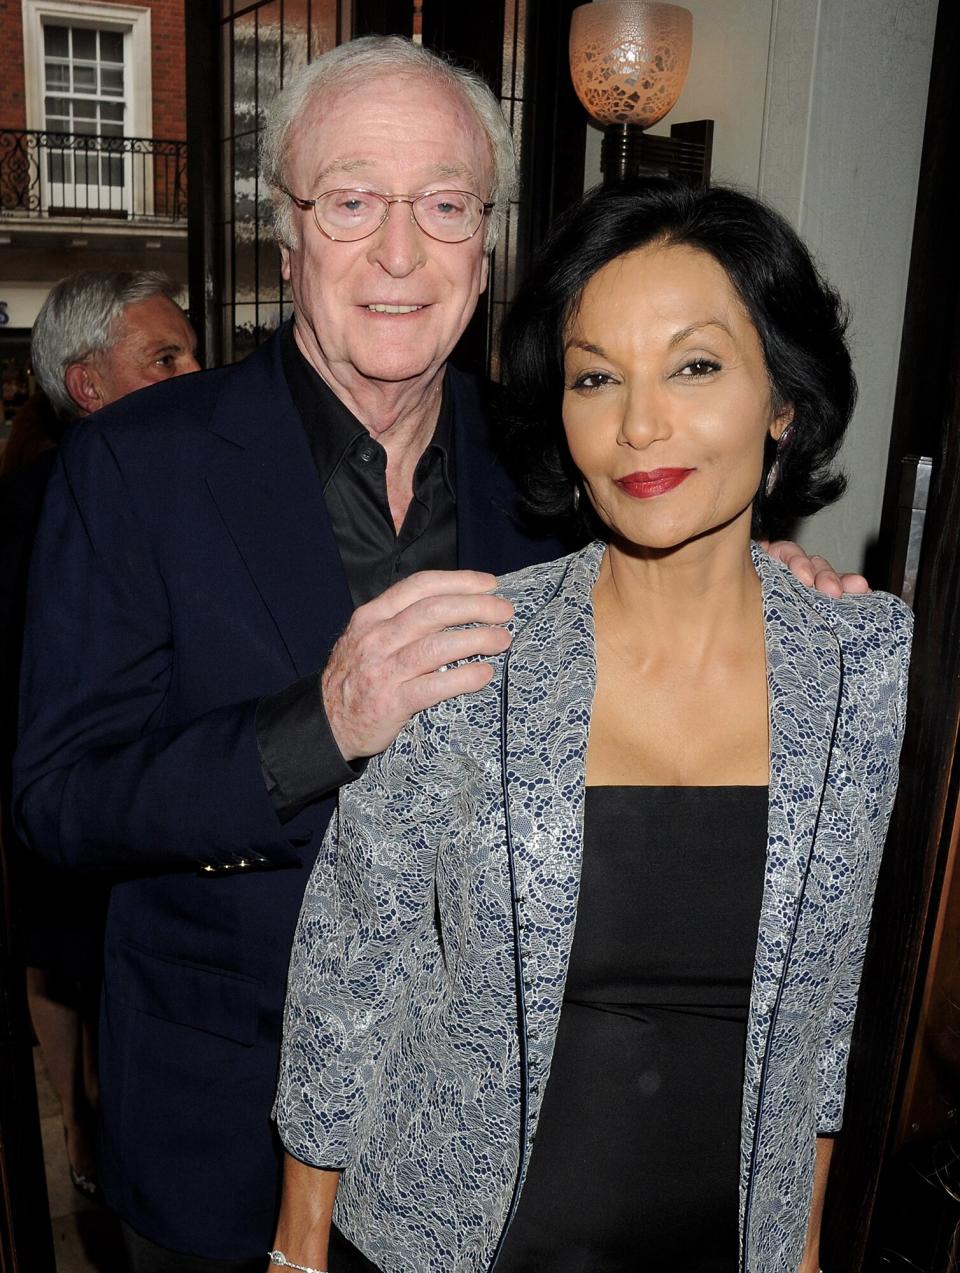 Sir Michael Caine (L) and Shakira Caine attend as Richard Caring and Sir Philip Green host Johnny Gold's 80th Birthday at 34 Grosvenor Square on June 25, 2012 in London, England